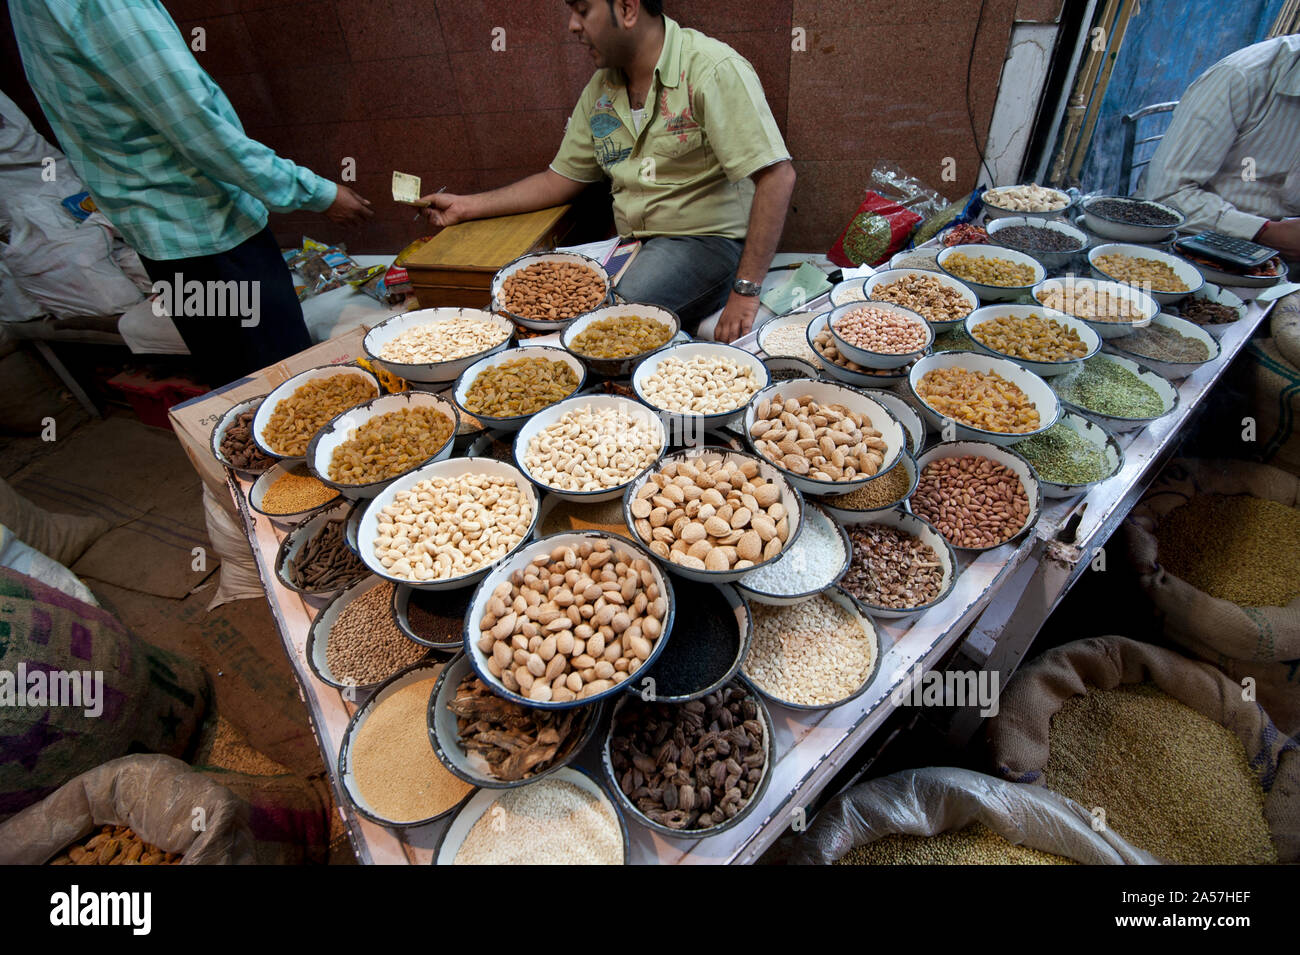 Dry fruits for sale at a market stall, Chandni Chowk, Delhi, India Stock Photo